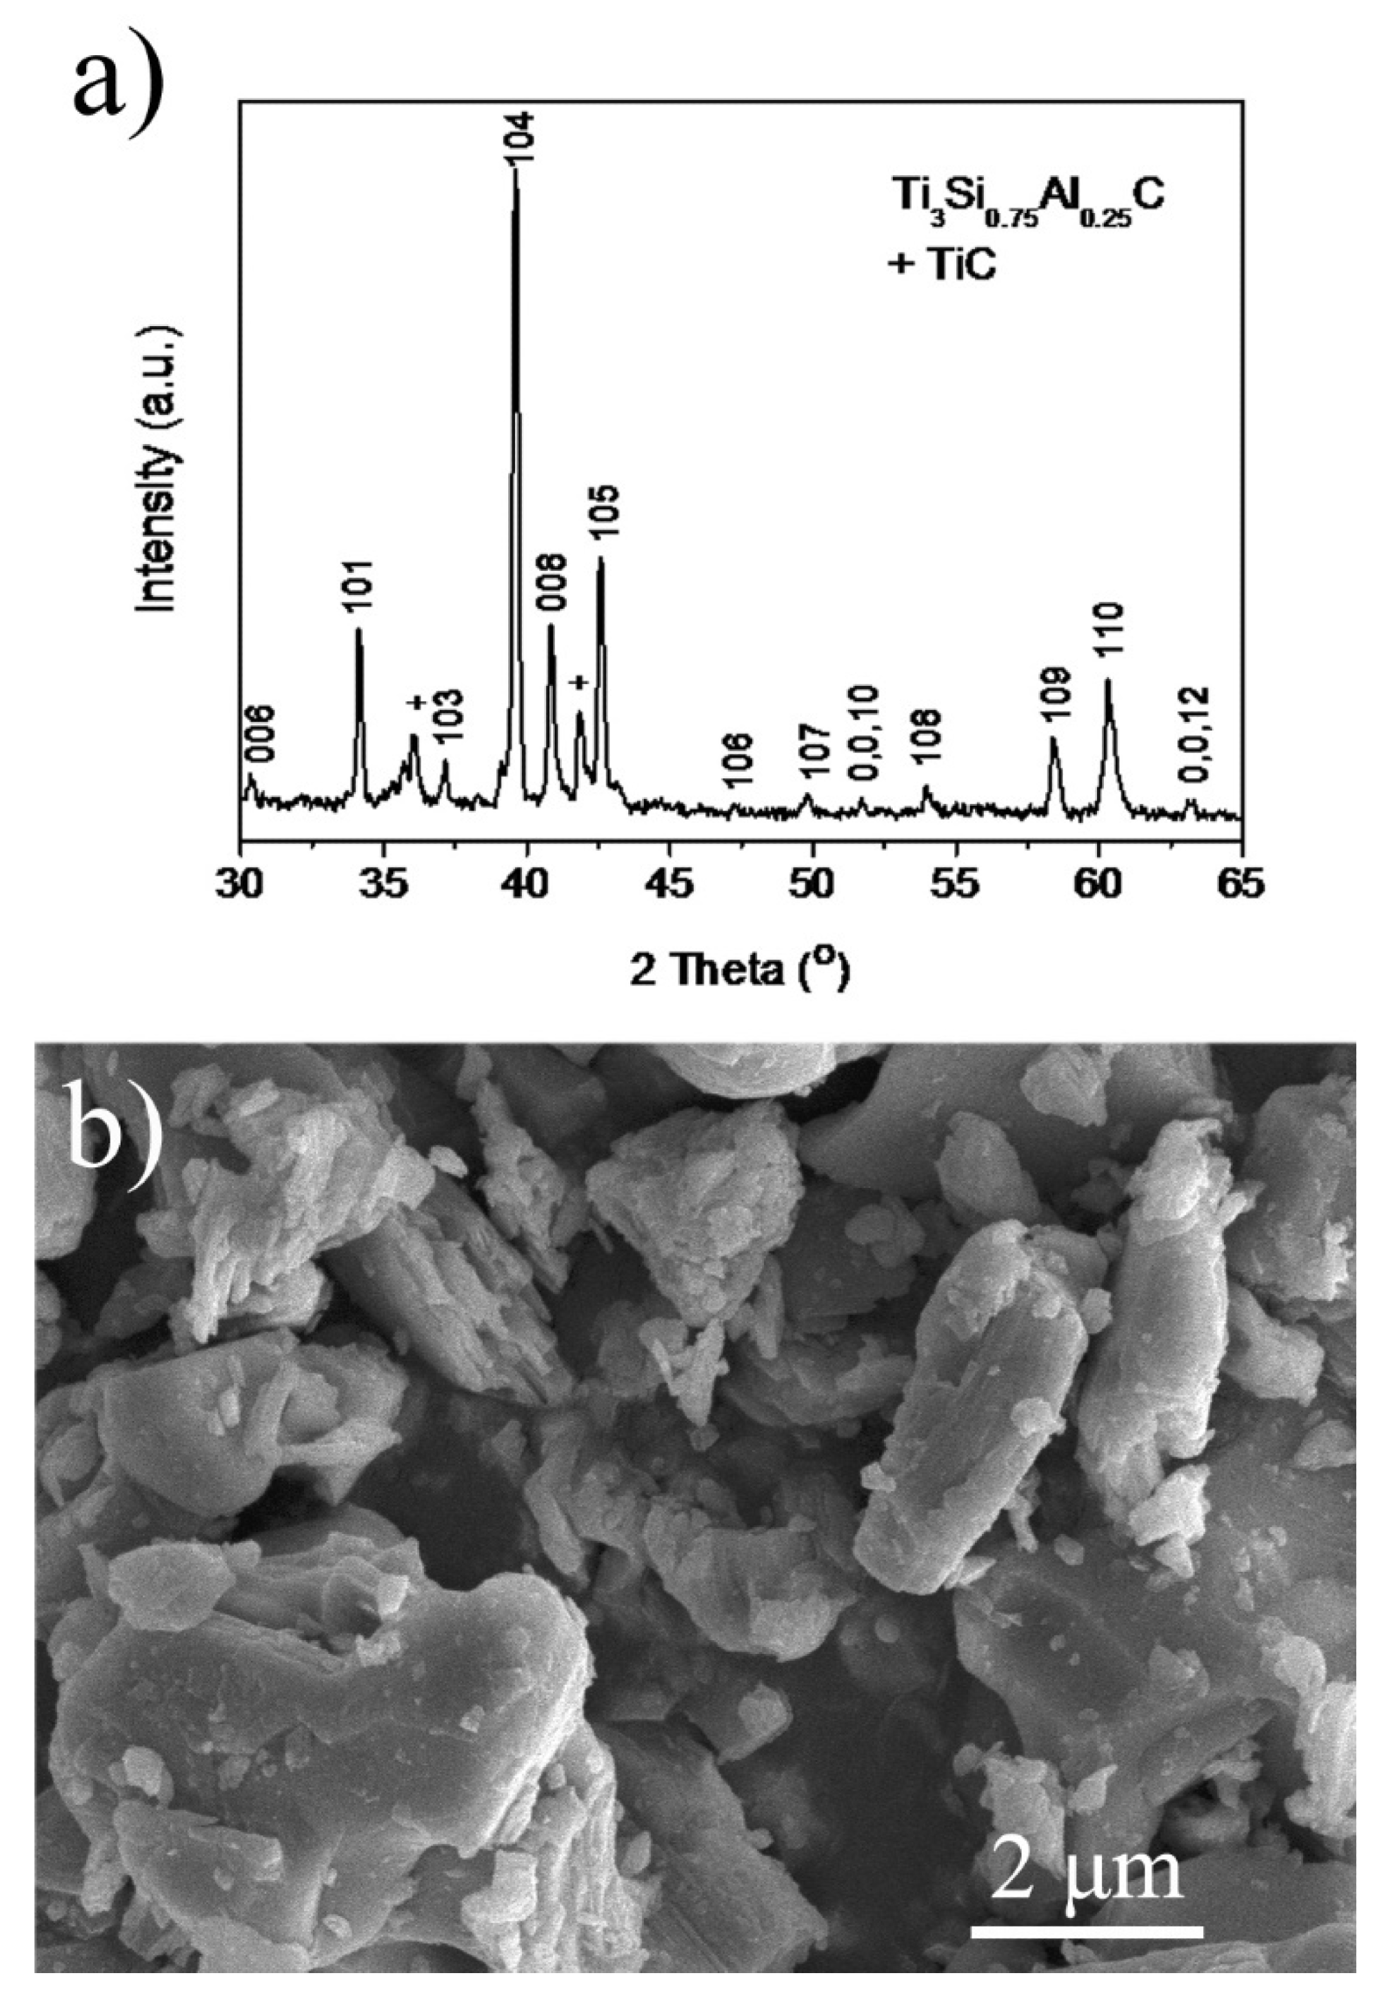 (a) XRD pattern and (b) SEM micrograph of the product synthesized by SHS.